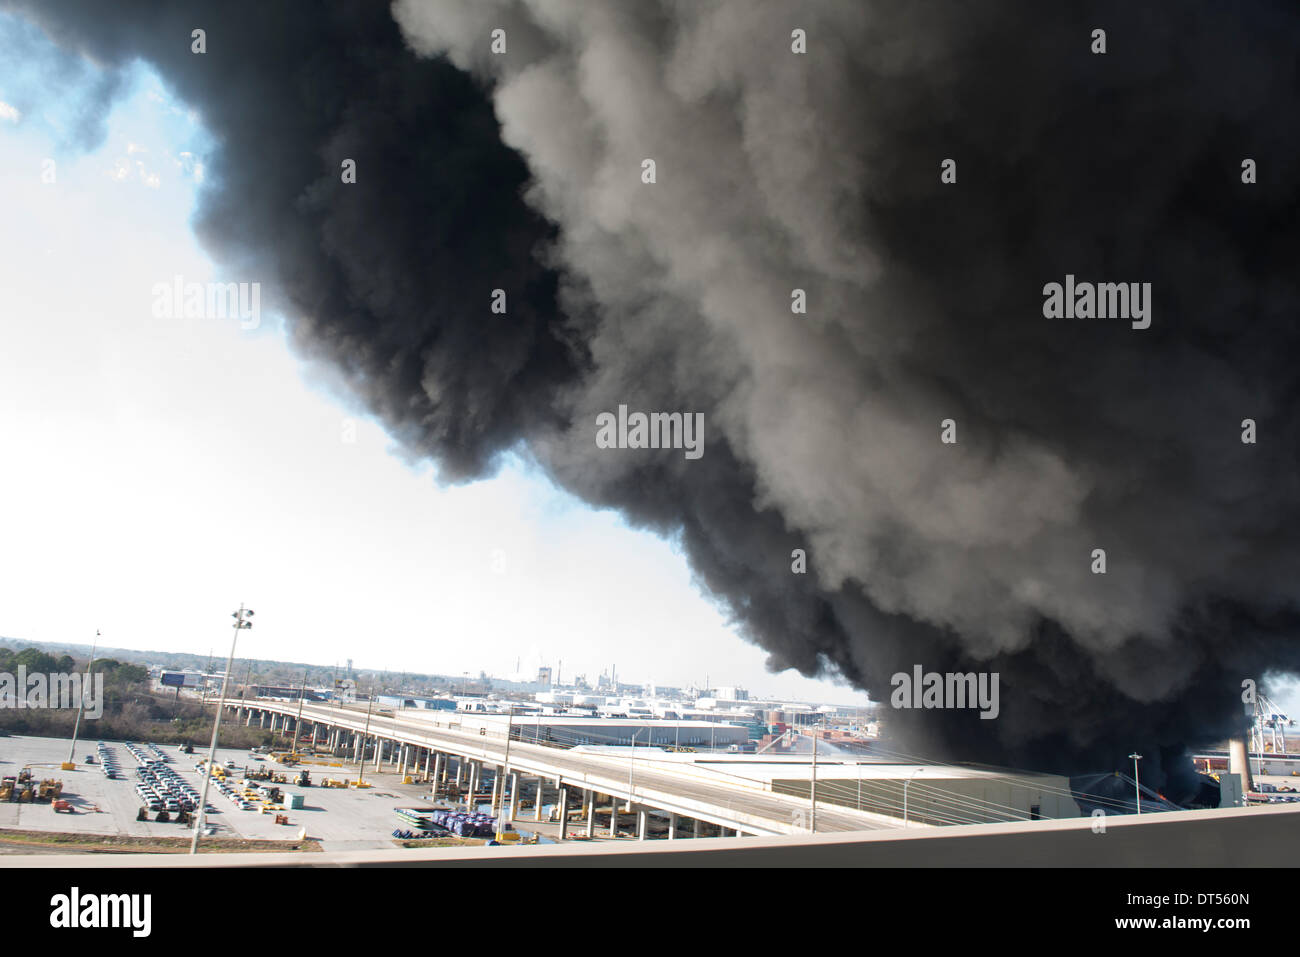 Savannah, Georgia, USA. 8th Fen, 2014. A warehouse fire at the Port of Savannah sends black smoke over Savannah, Georgia, U.S.A., on Saturday, February 8, 2014. Firefighters worked to contain and extinguish the blaze that erupted at the port’s Ocean Terminal not far from downtown Savannah. Credit:  JT Blatty/Alamy Live News Stock Photo